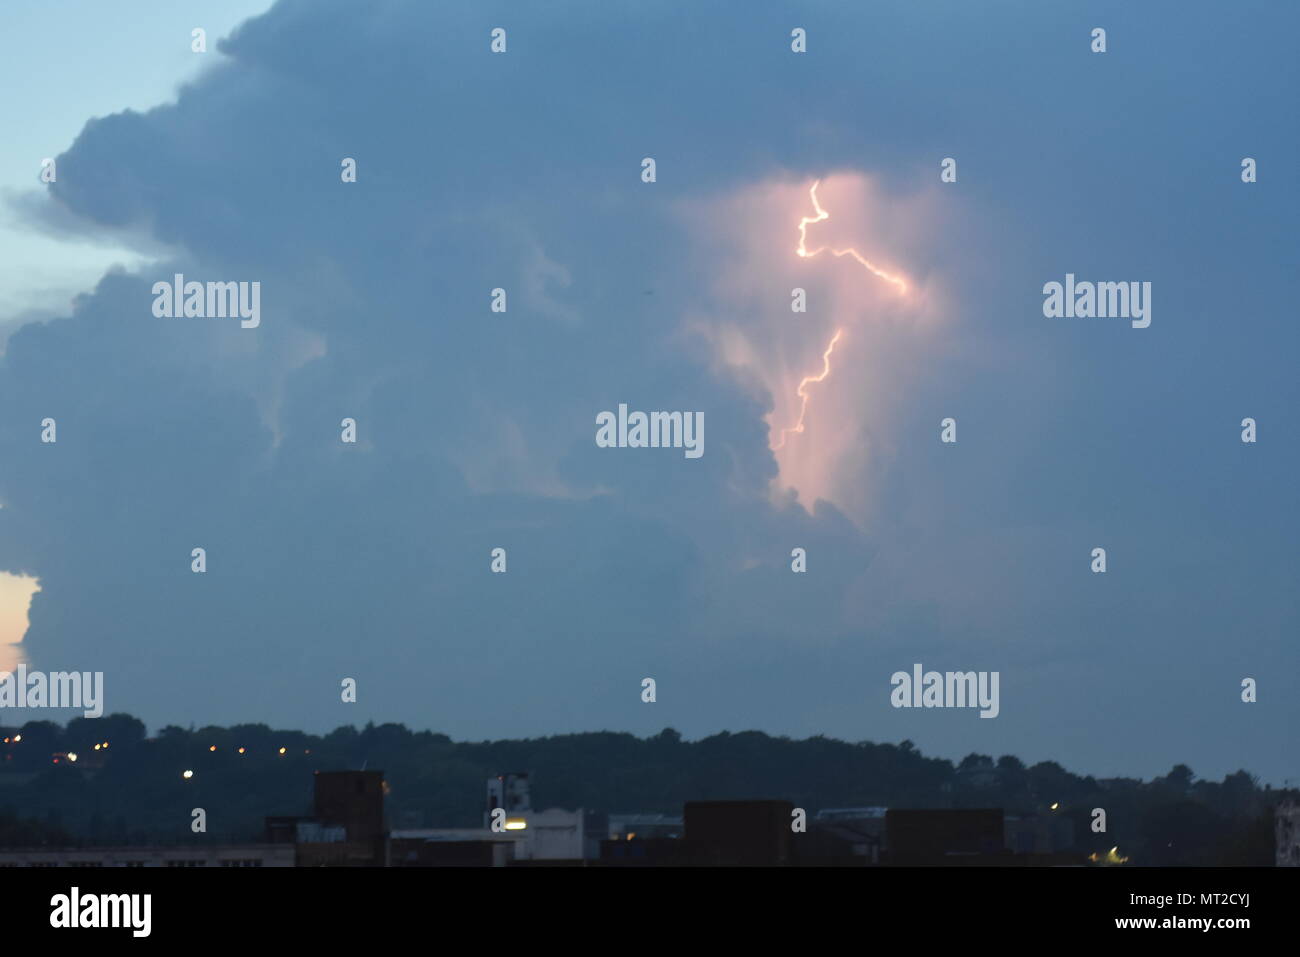 London, UK. 27th May 2018. Second day of the Thunderstorm lights up the skies over London with more lightning as the Bank holiday continues. Bolts of lightning flash and crack up in the clouds in what is being called the Mother of all thunder storms. The temperature is currently around 20 degrees and is predicted to reach 29 tomorrow so we can expect to get more thunder and lightning throughout the bank holiday. Credit: Ricardo Maynard/Alamy Live News Stock Photo